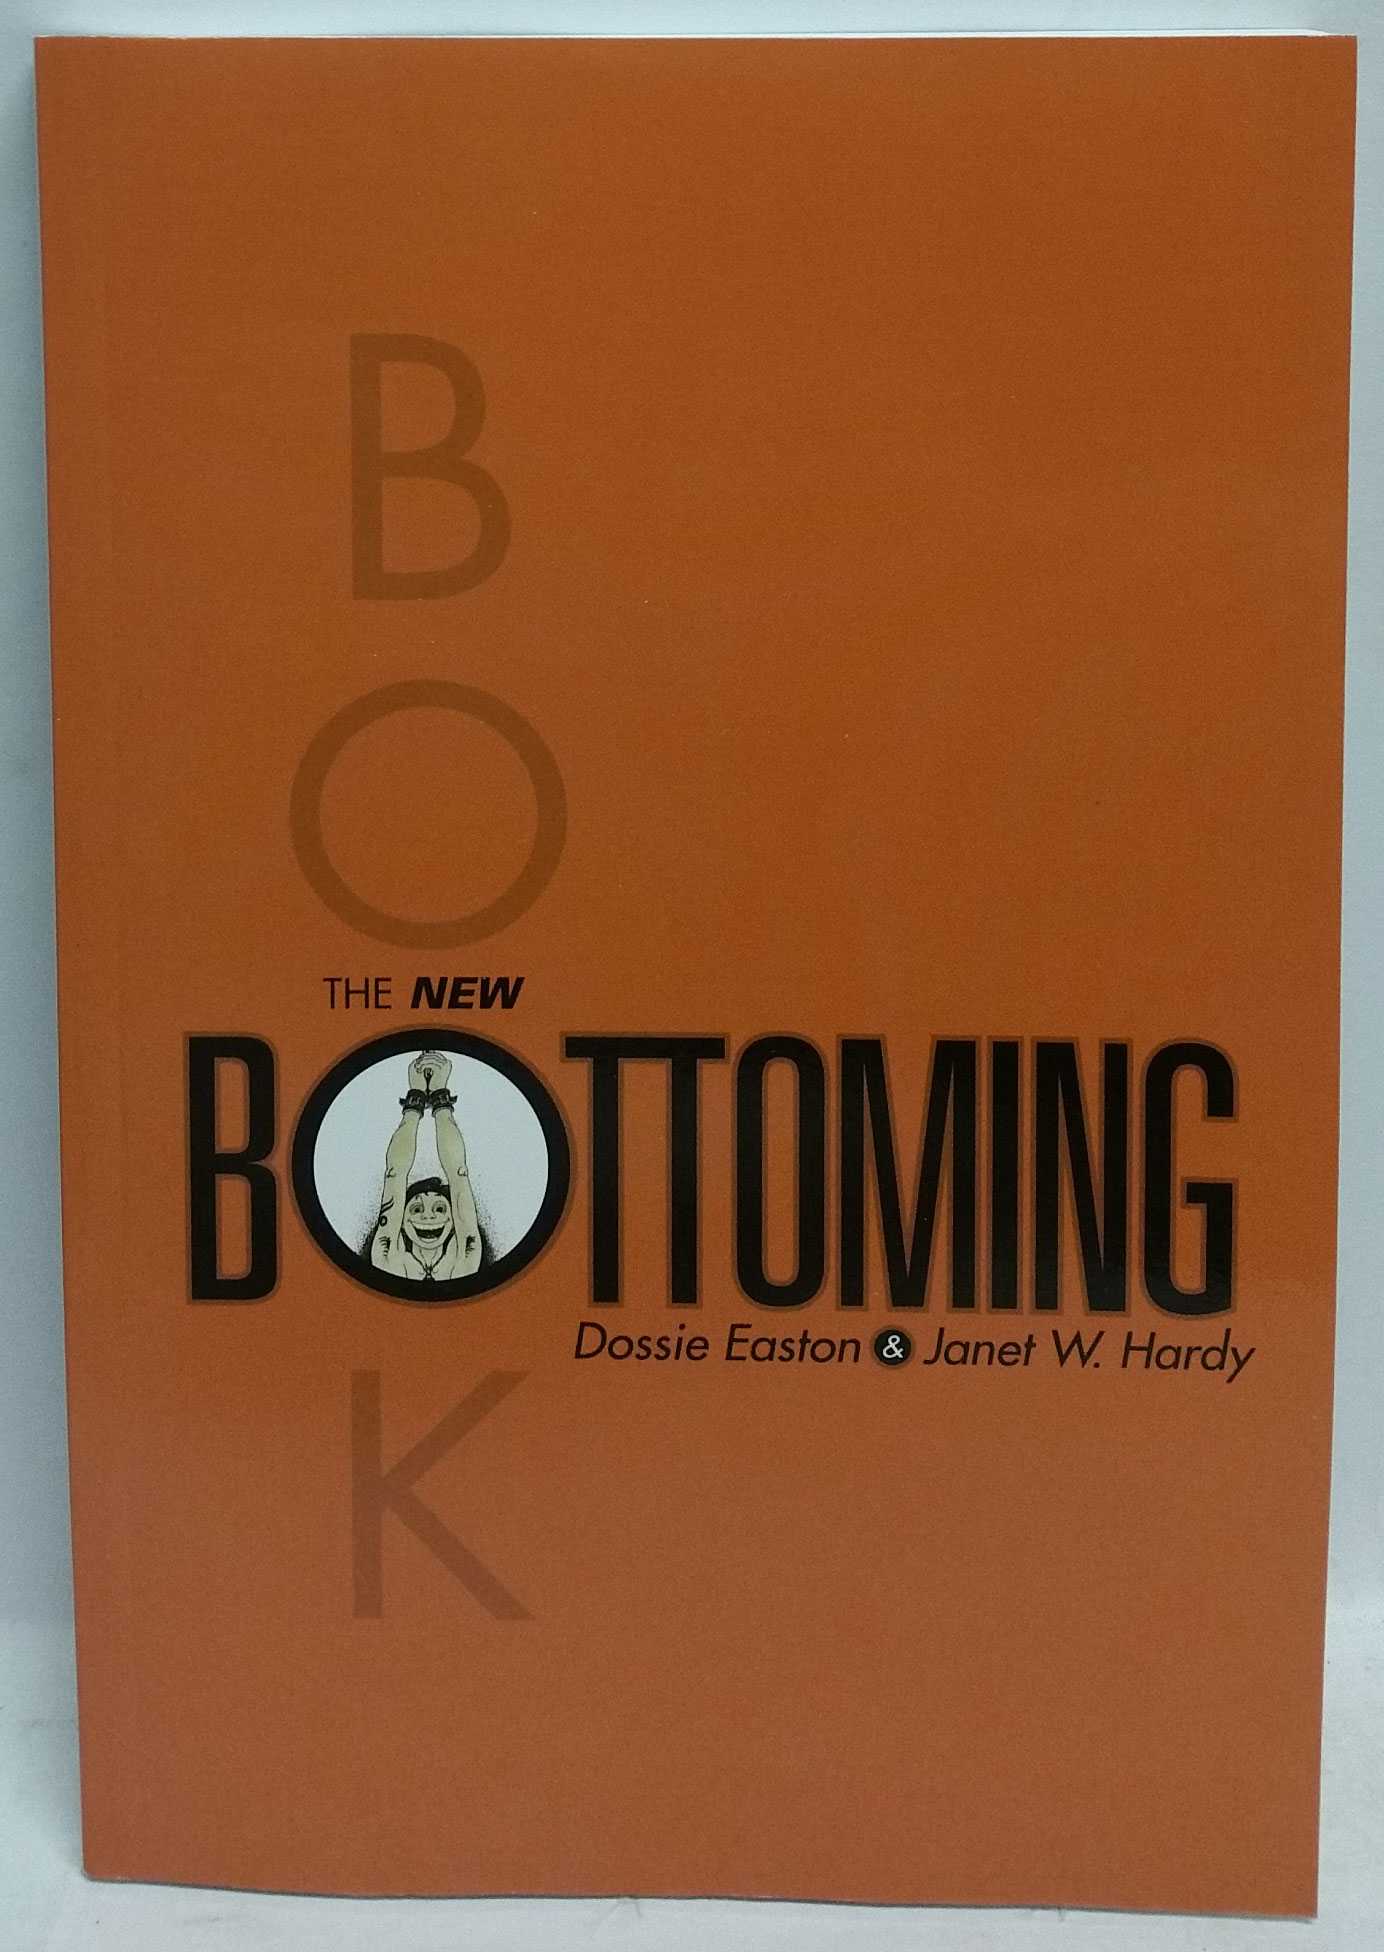 Dossie Easton; Janet W. Hardy - The New Bottoming Book